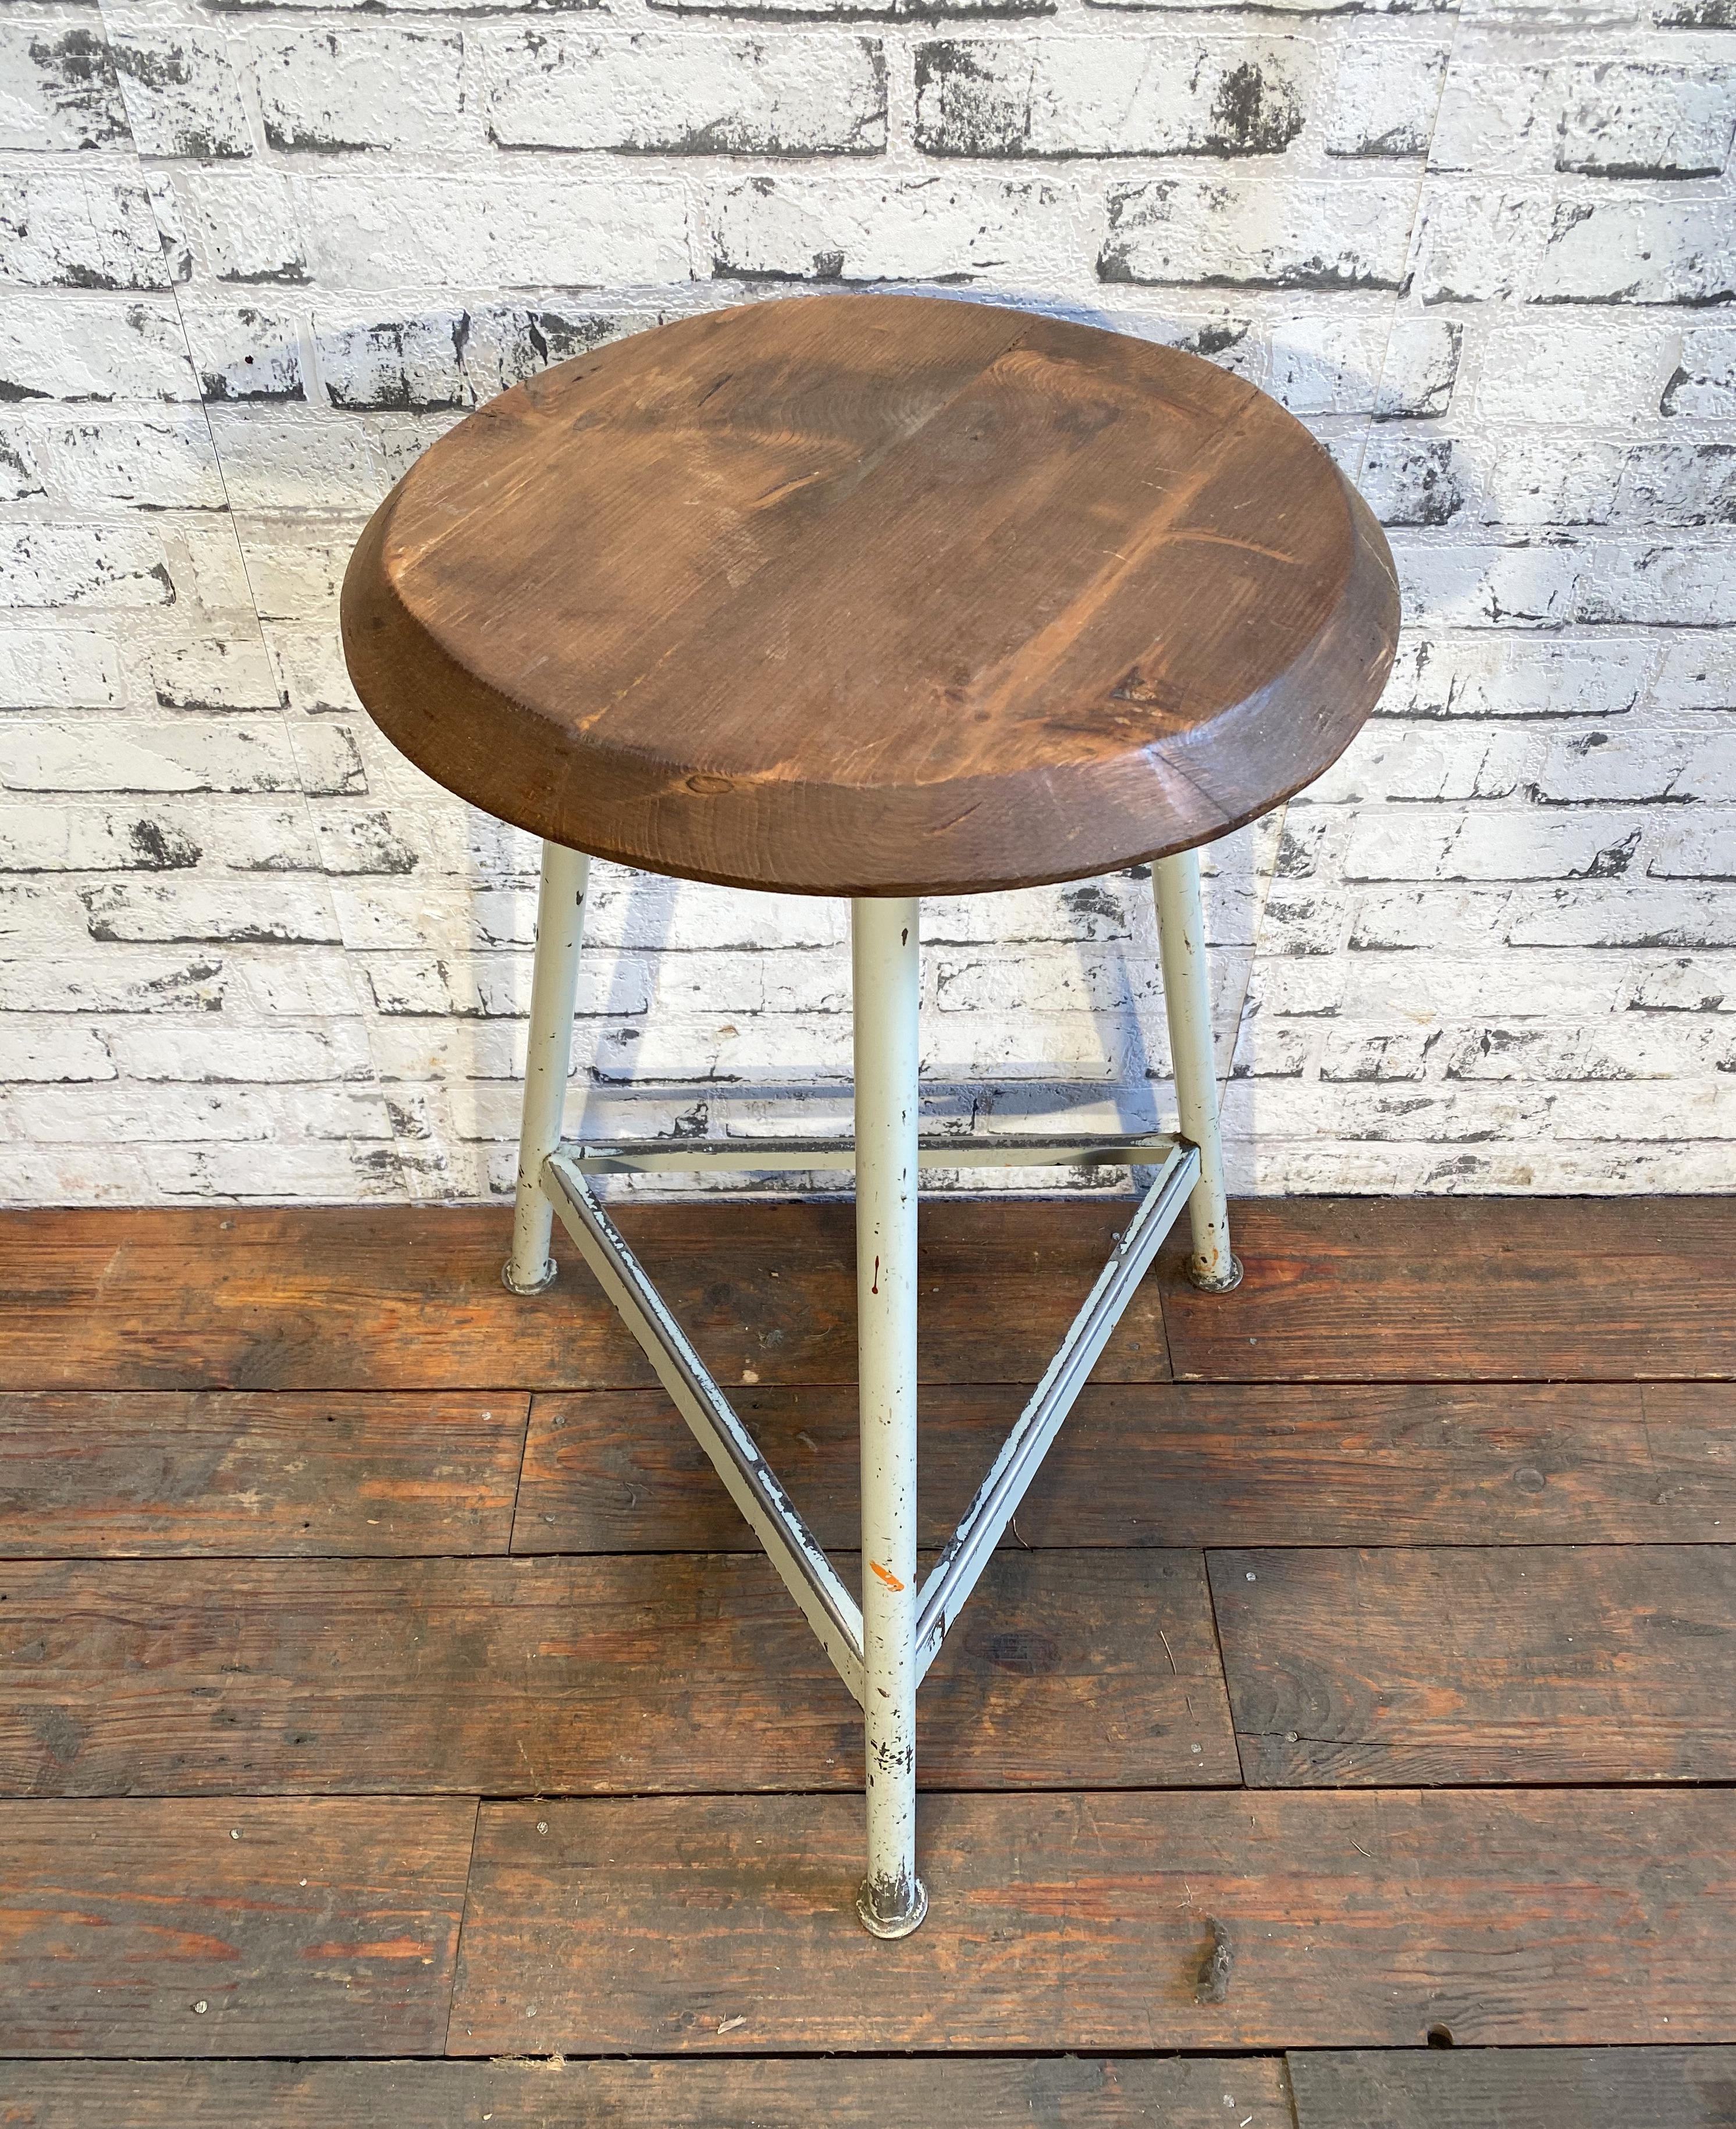 Industrial stool with a wooden seat and white metal frame.